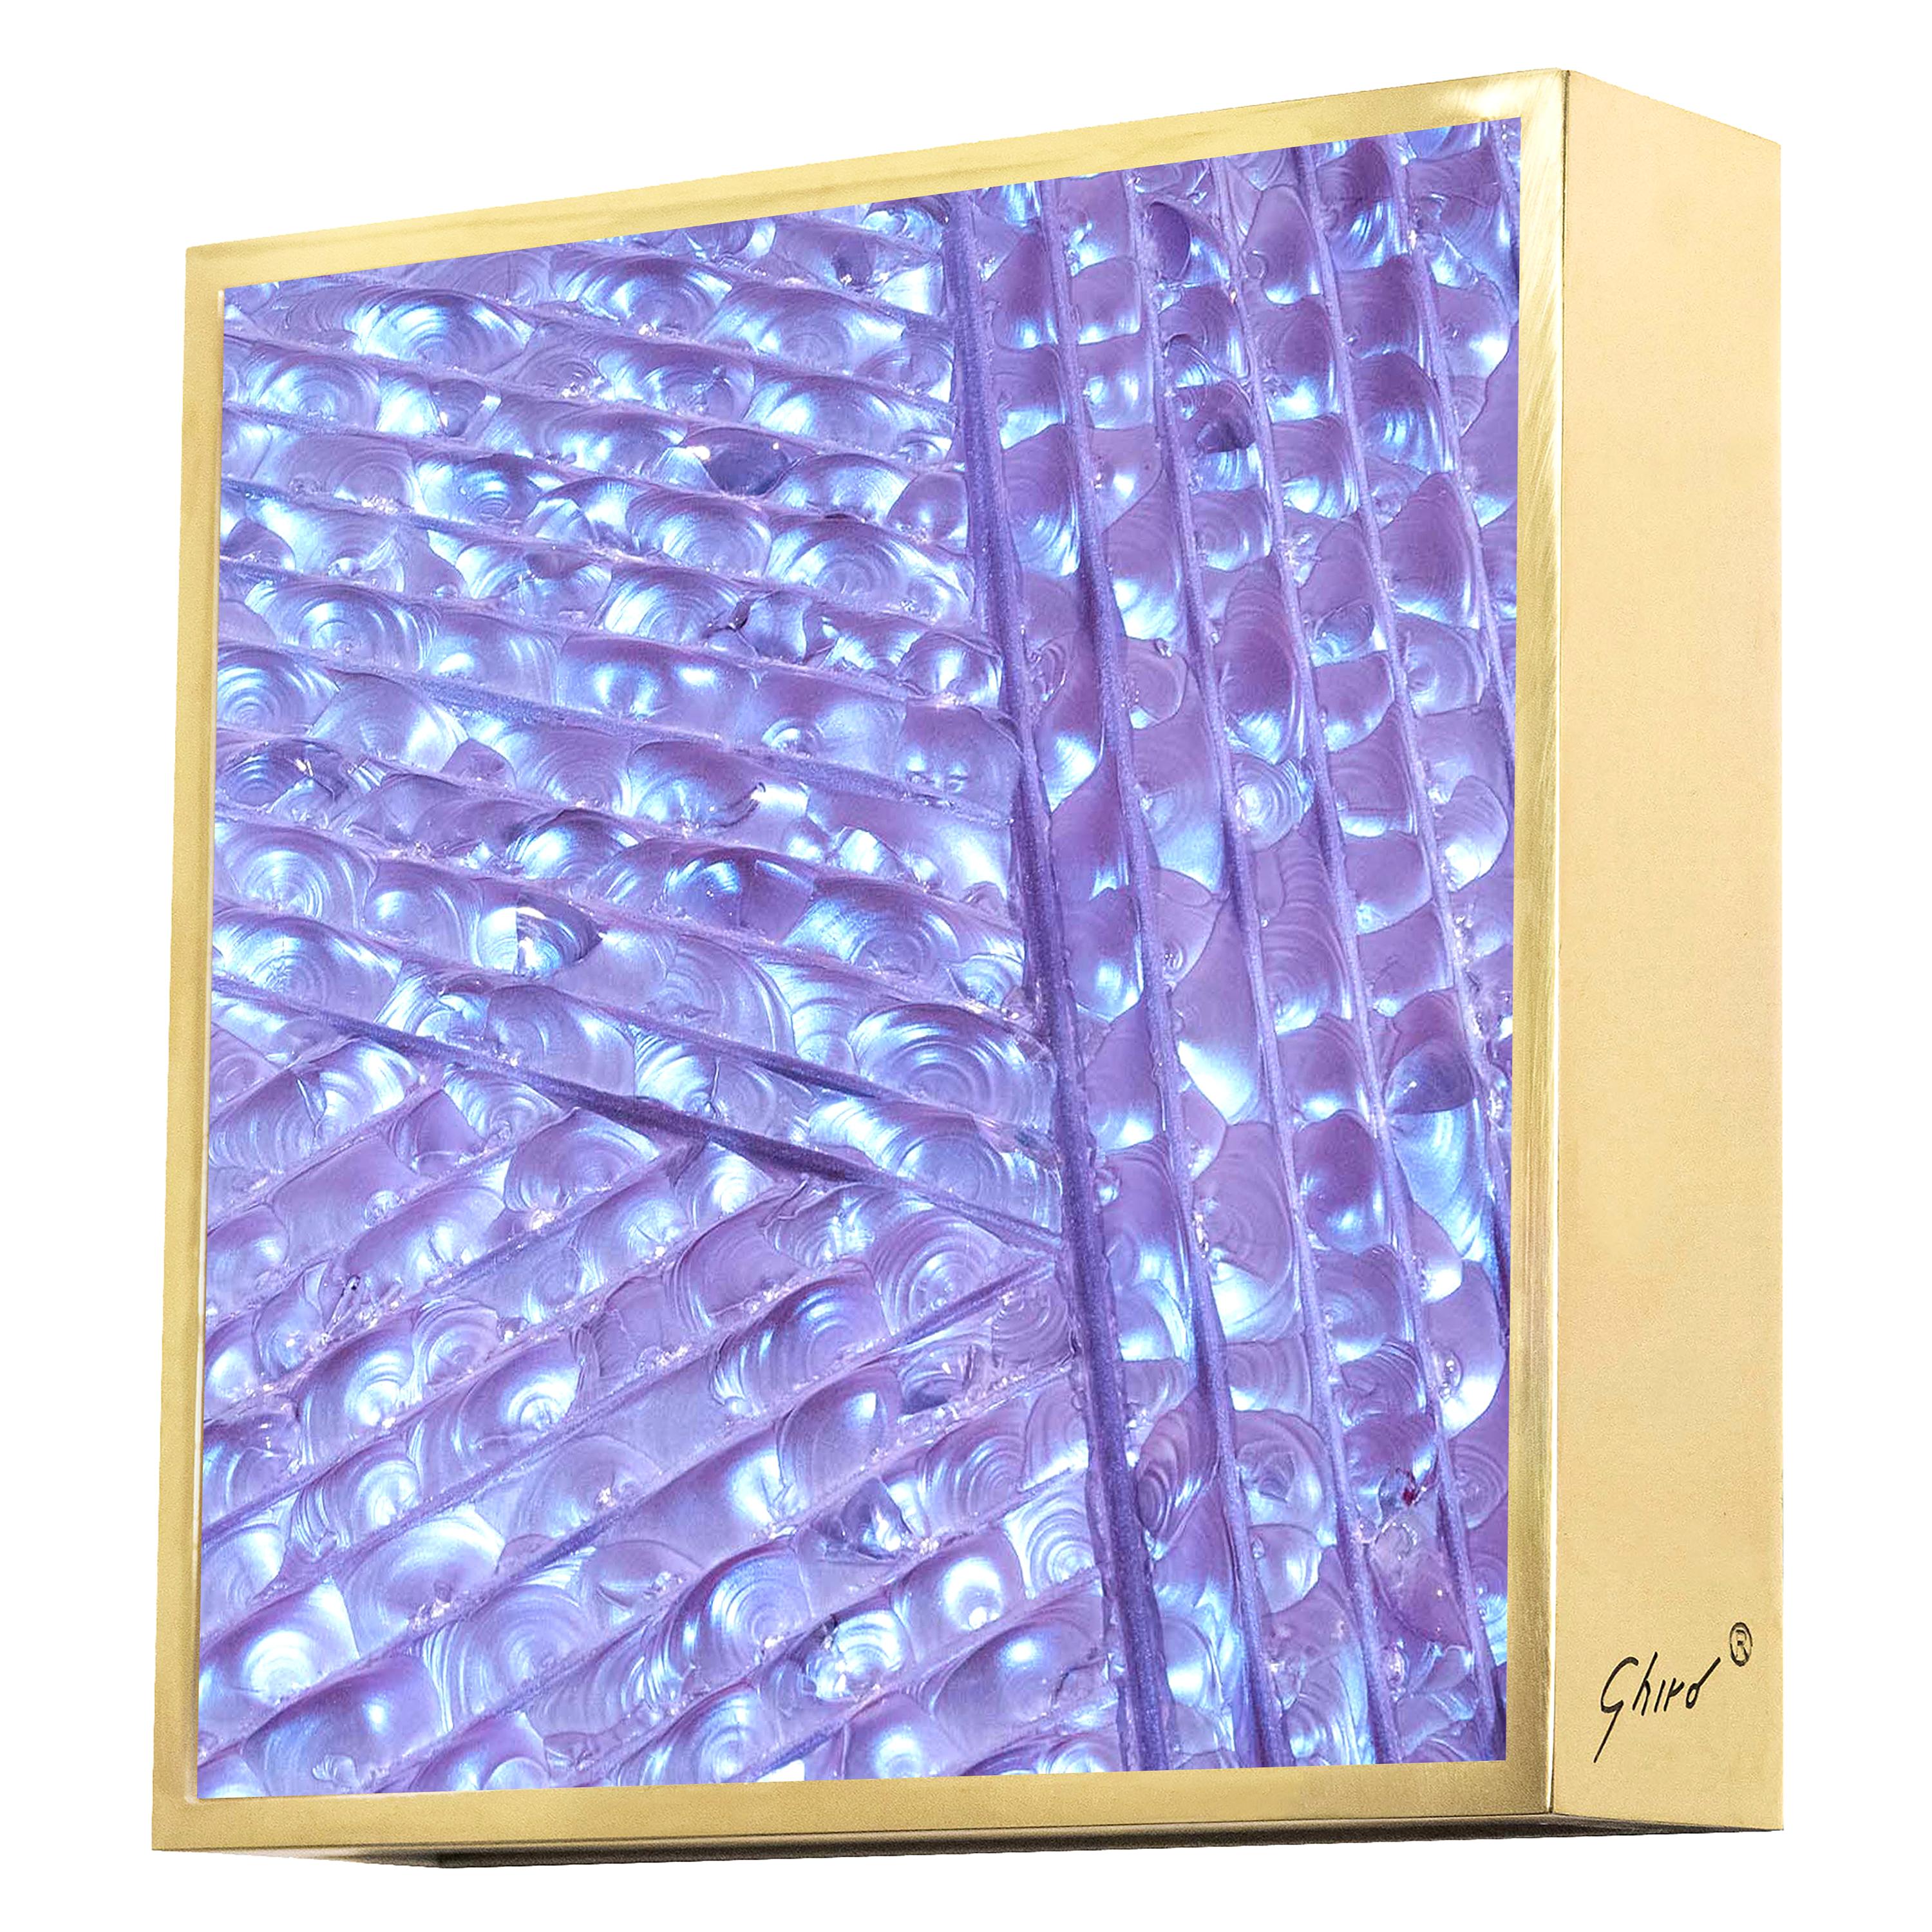 Contemporary by Ghirò Studio 'Square' Sconce Iridescent Blue and Purple Crystal